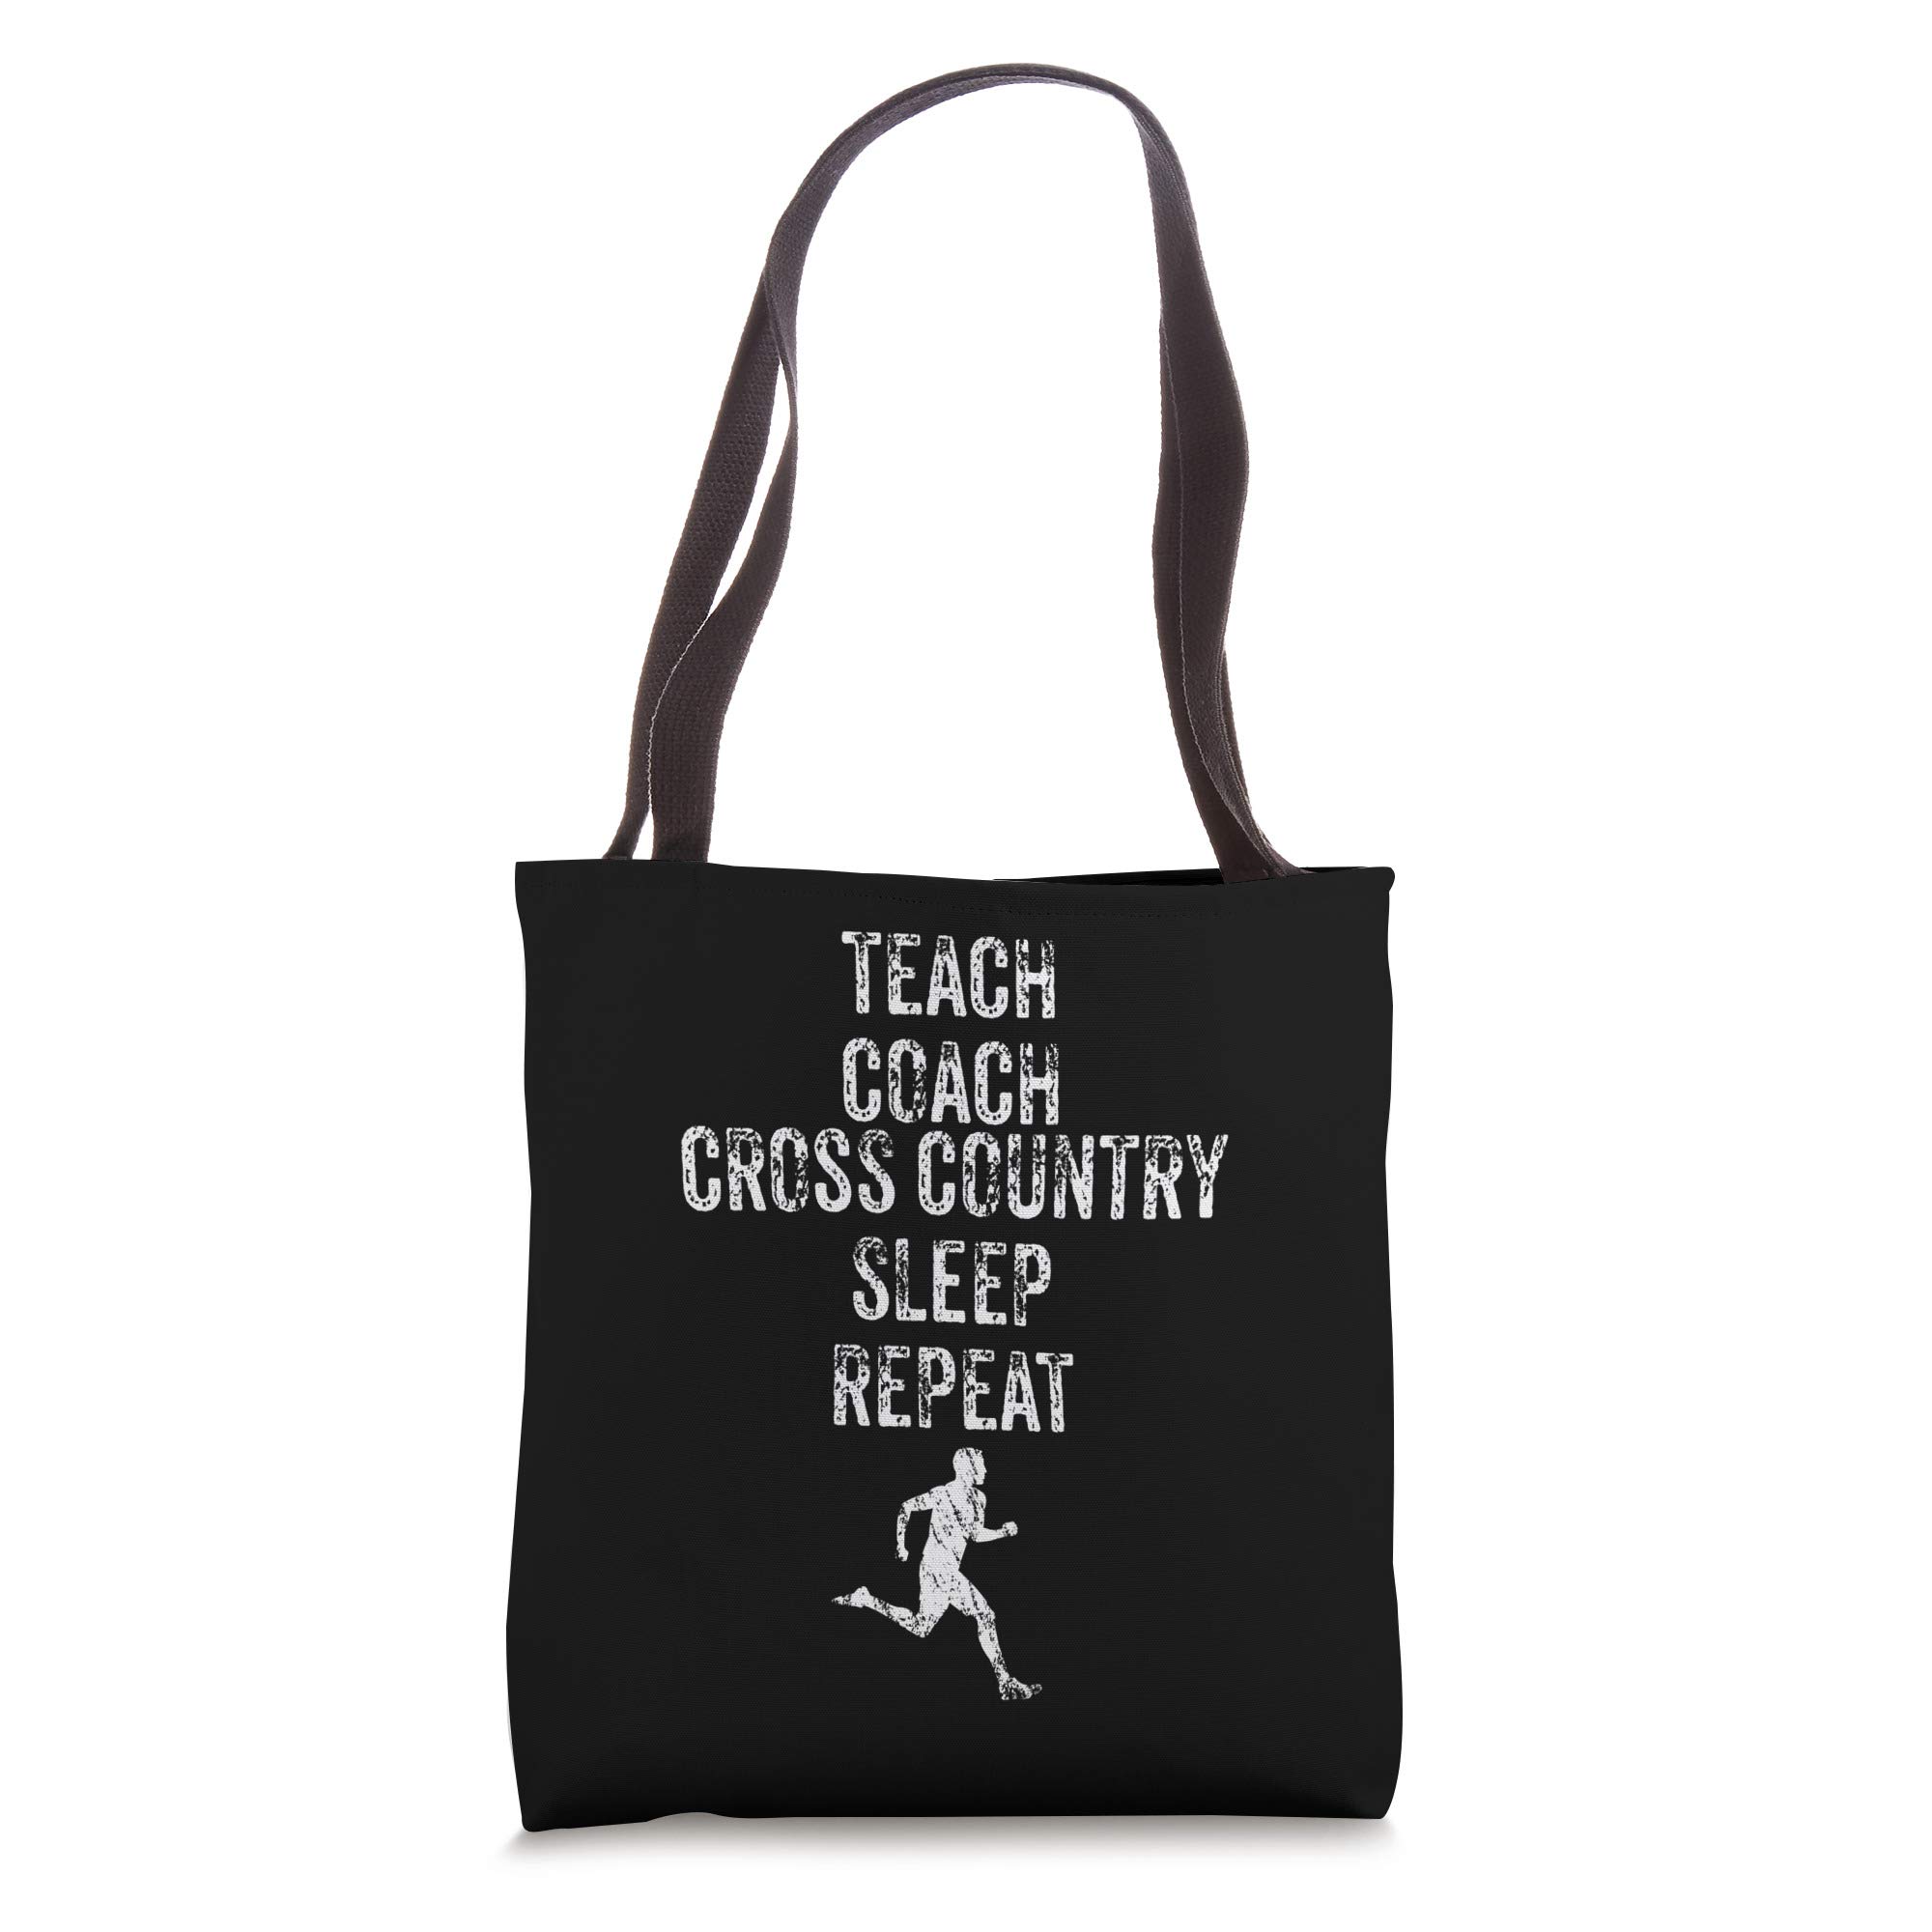 Cross Country Coach Gift Idea for XC Teacher Funny Saying Tote Bag